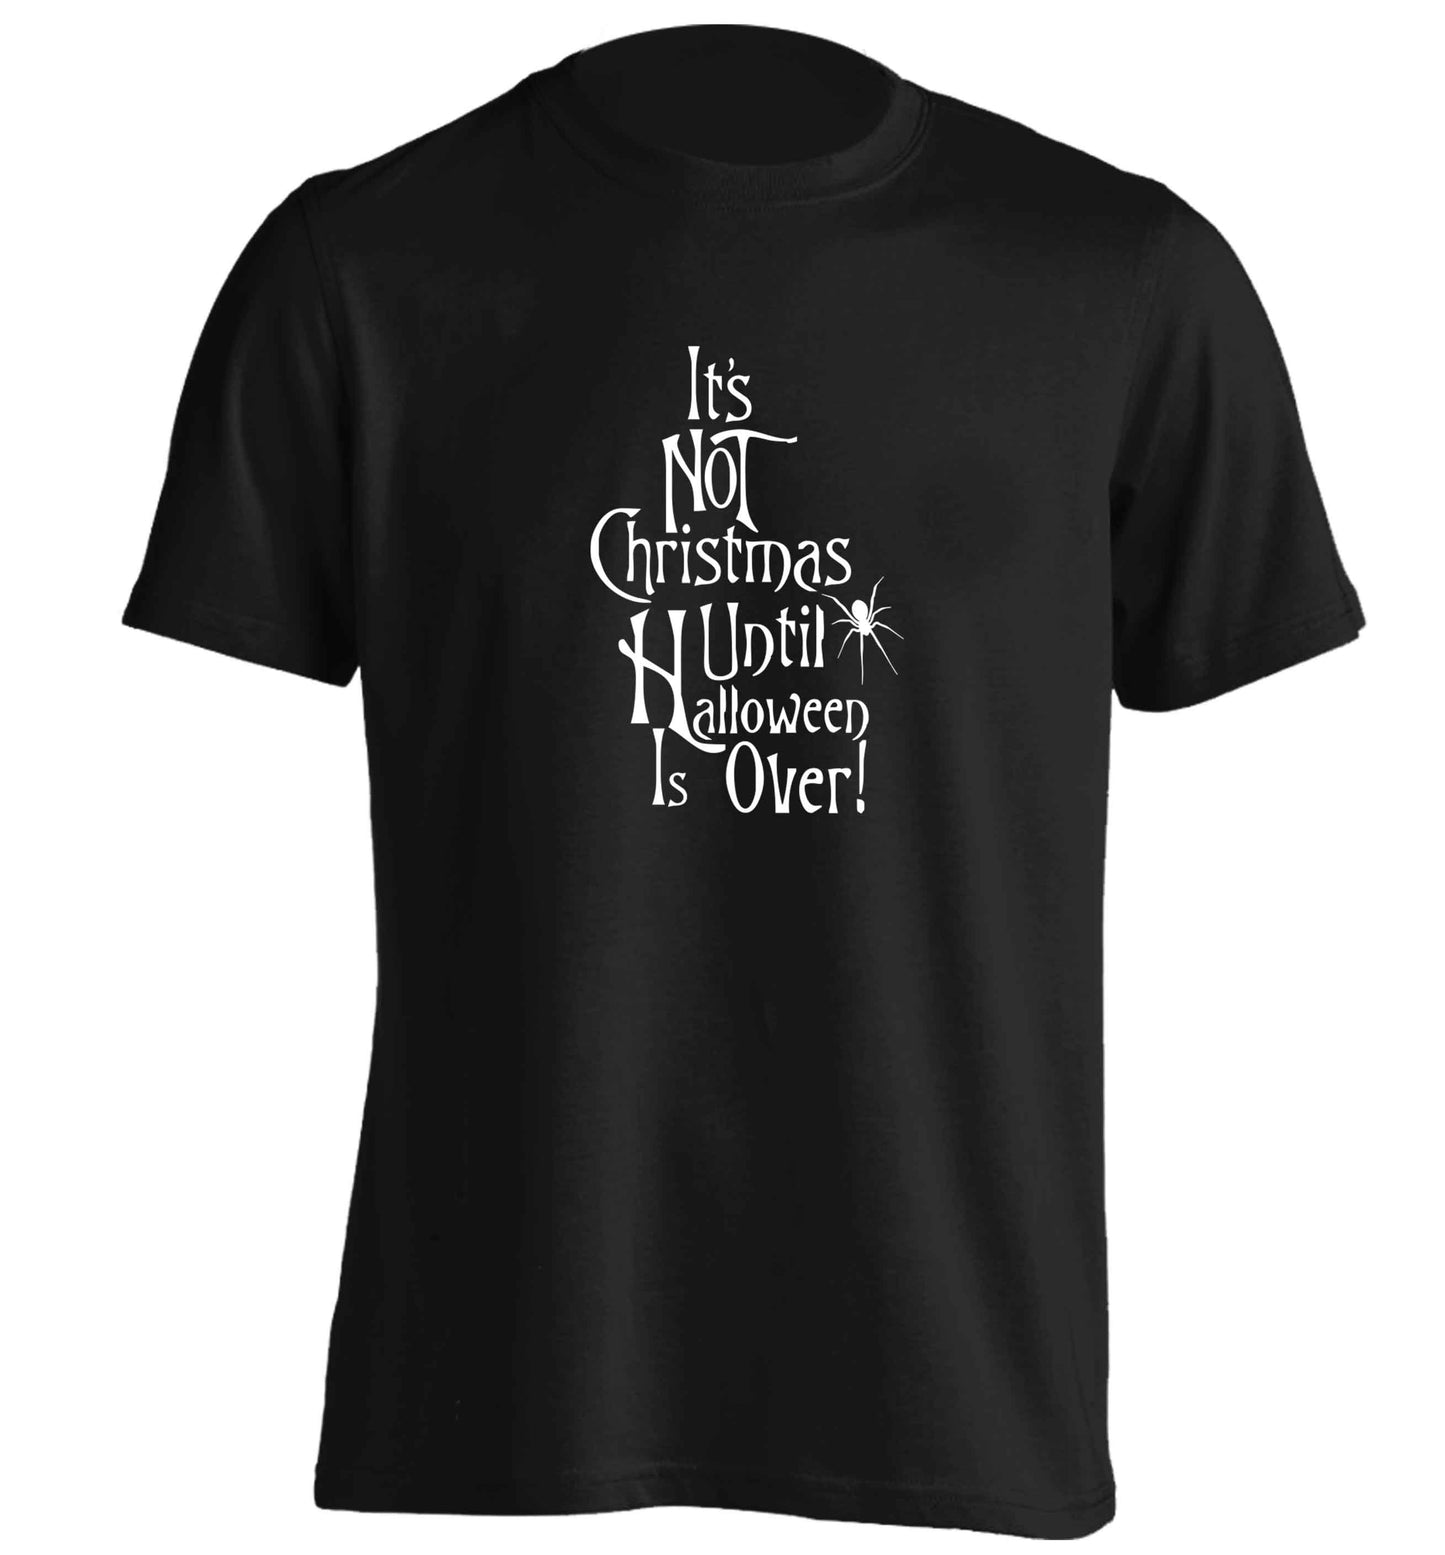 It's not Christmas until Halloween is over adults unisex black Tshirt 2XL